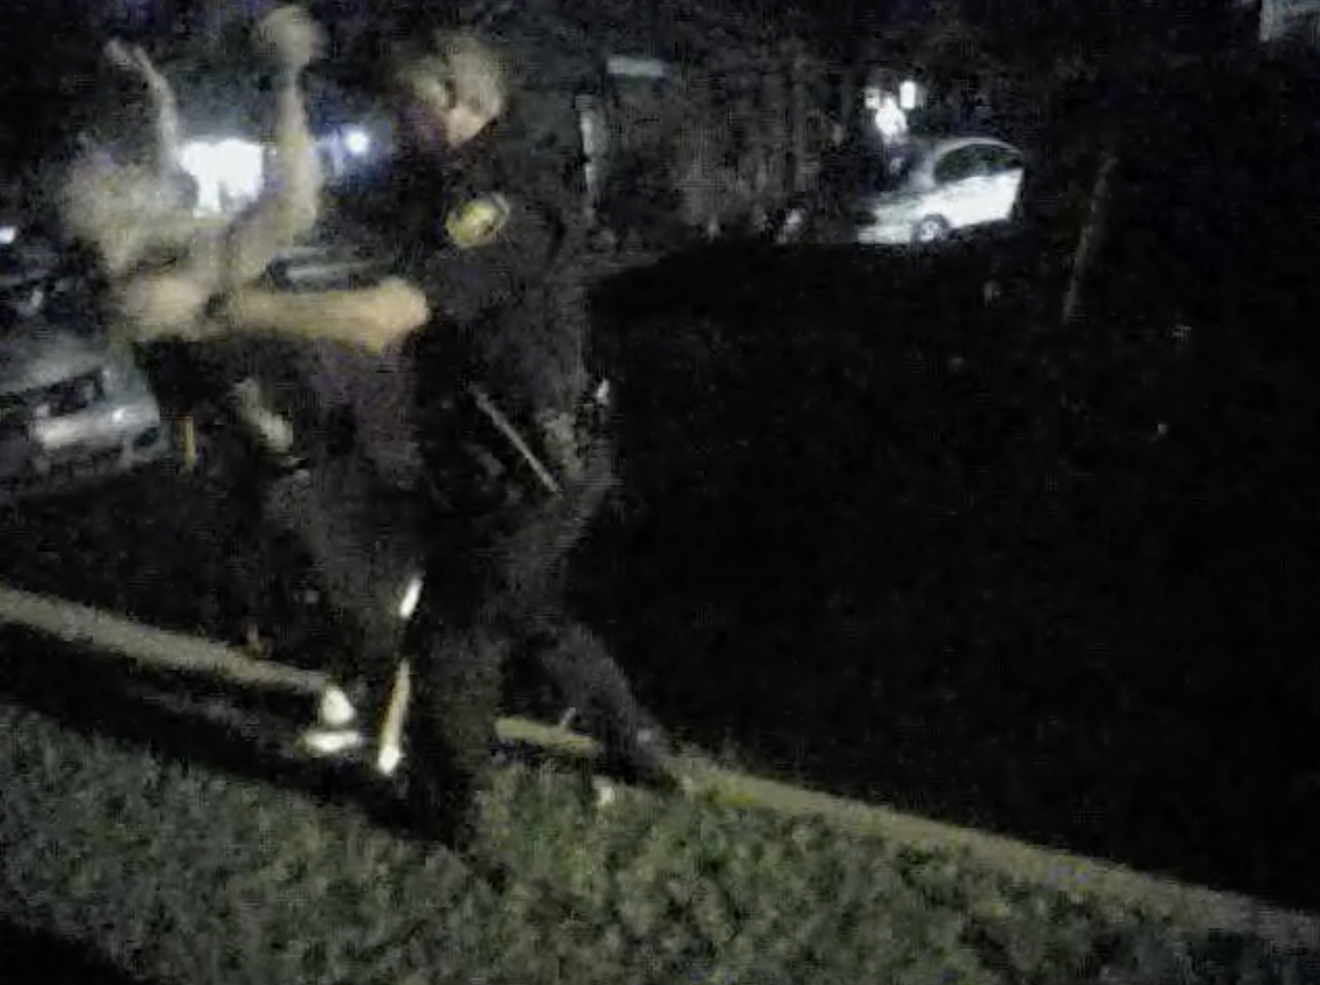 Video shows Fort Worth Police officer punch man in the face.